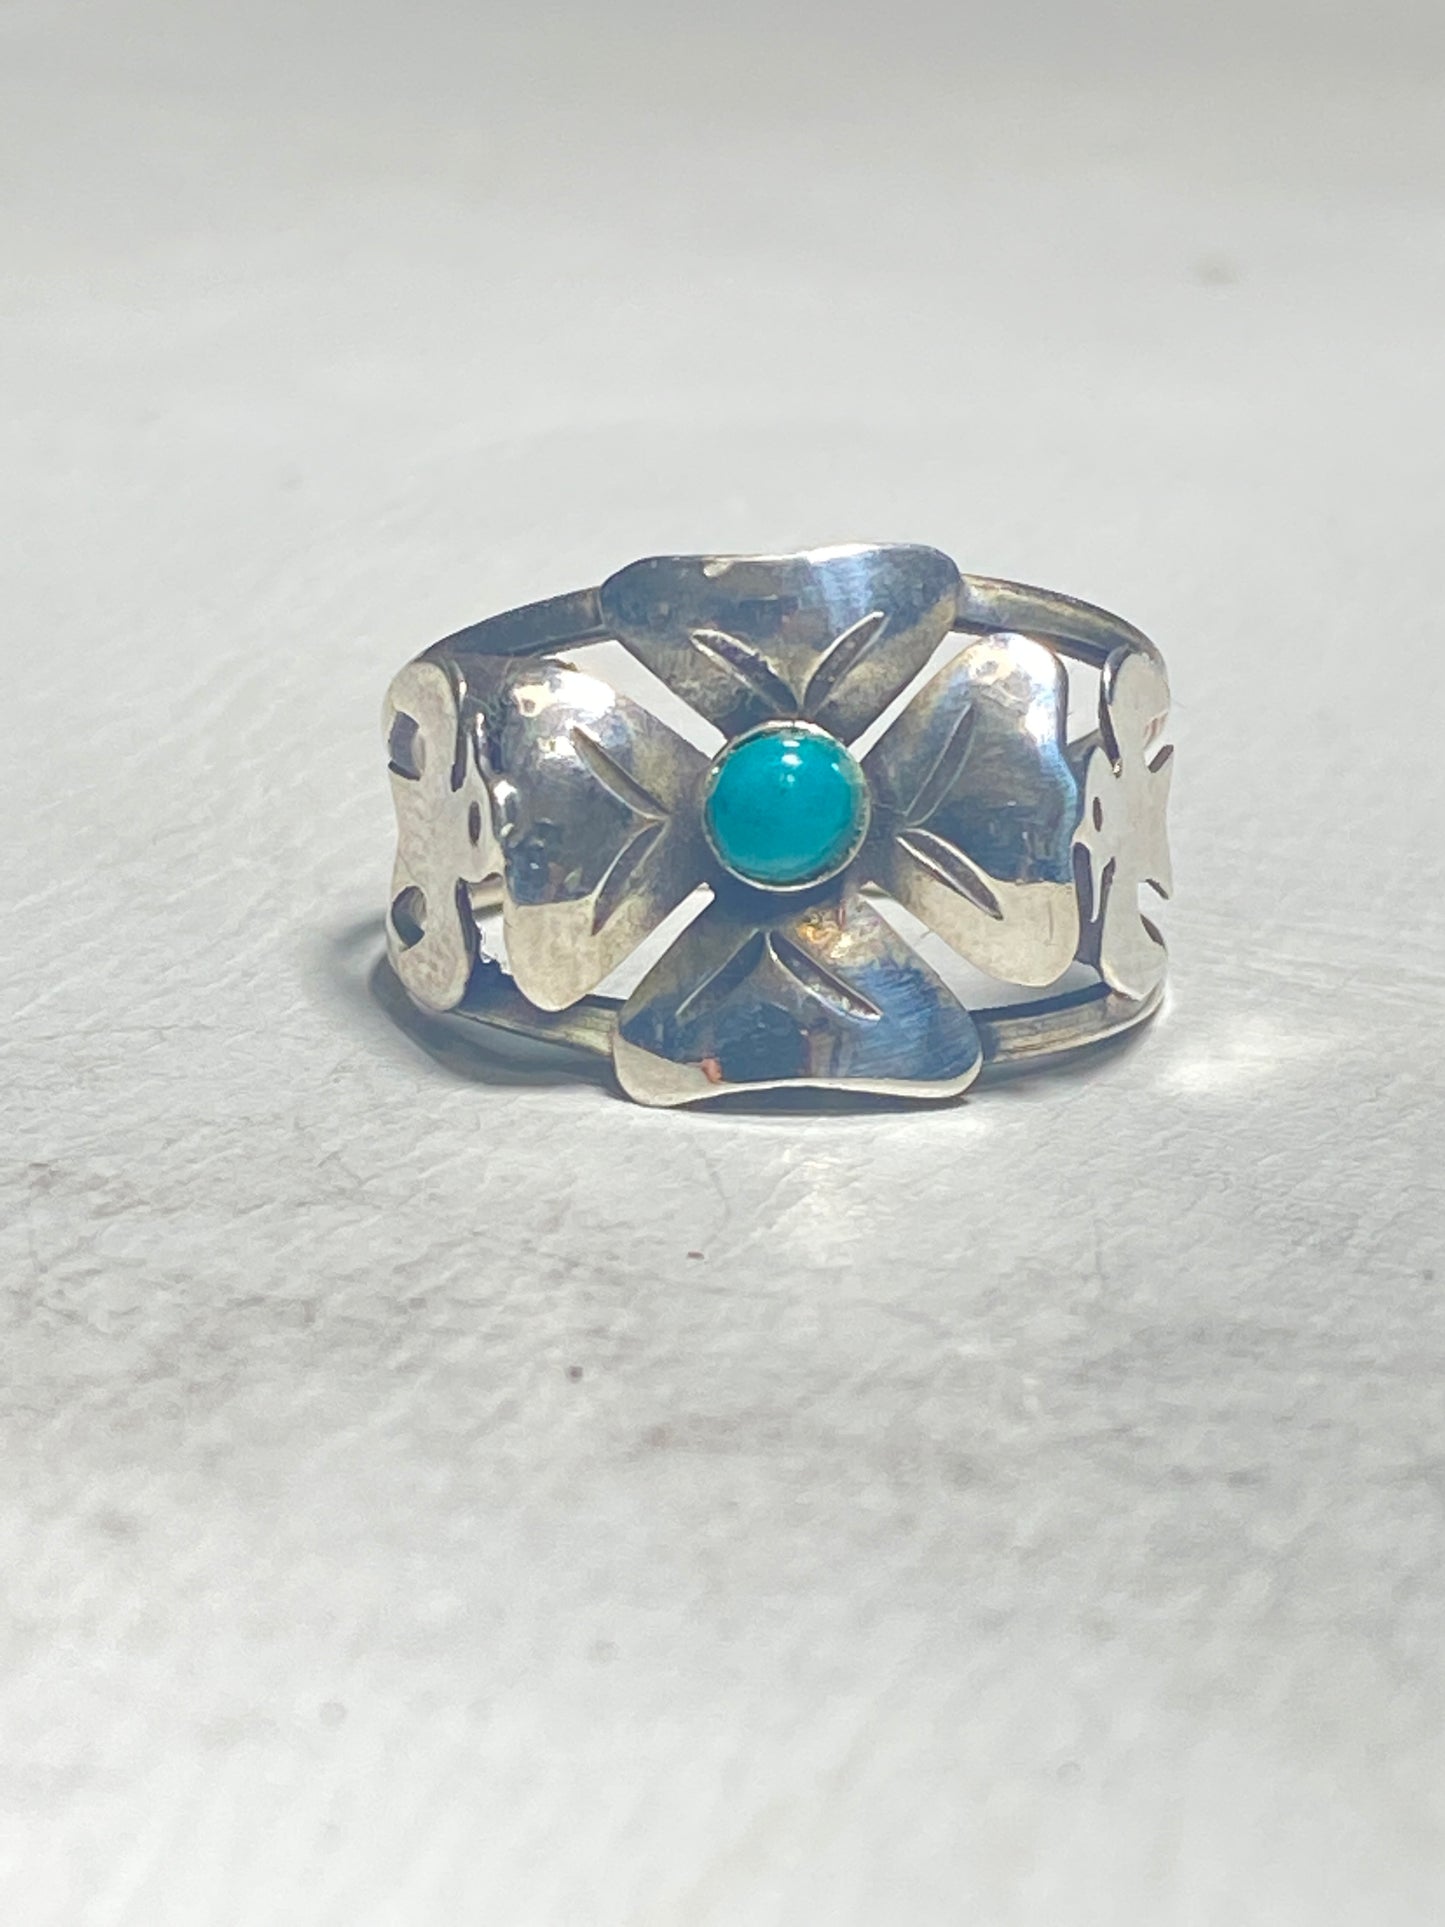 Turquoise ring flower bird 4 leaf clover good luck Mexico sterling silver band women girls